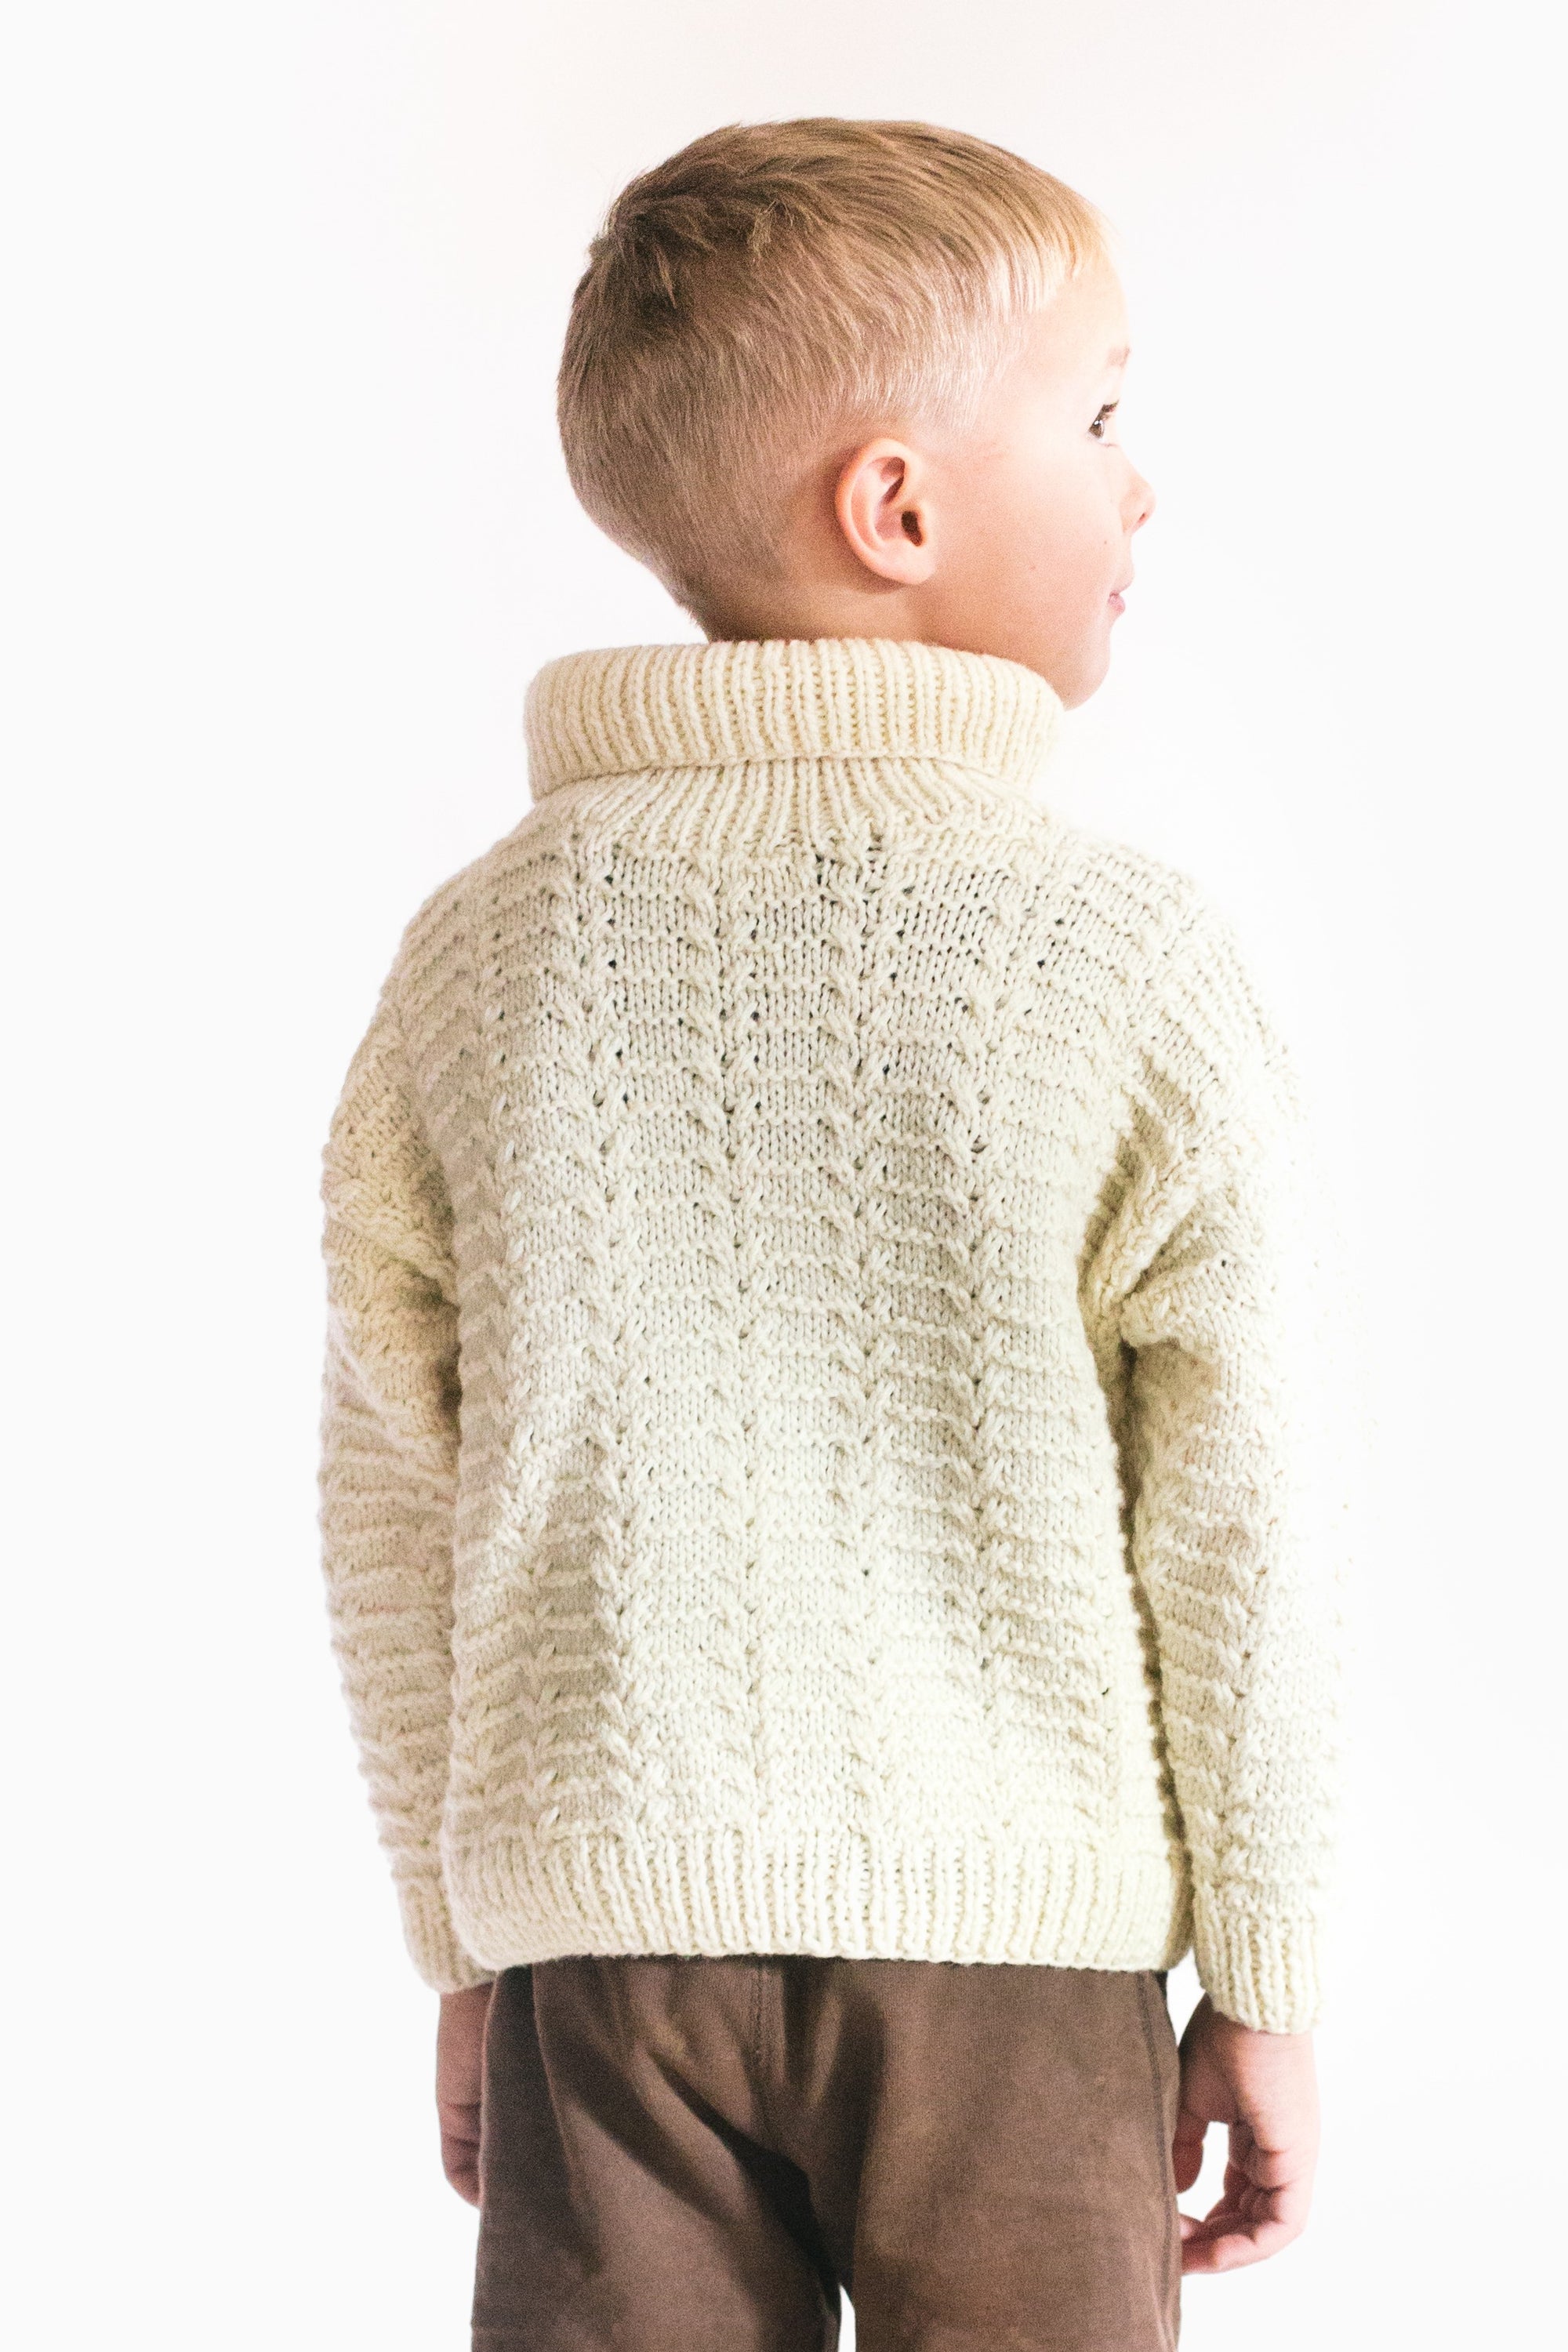 Boy wearing a cream colored hand knit sweater with a rolled neck, and brown shorts.  Standing in front of a white backdrop.